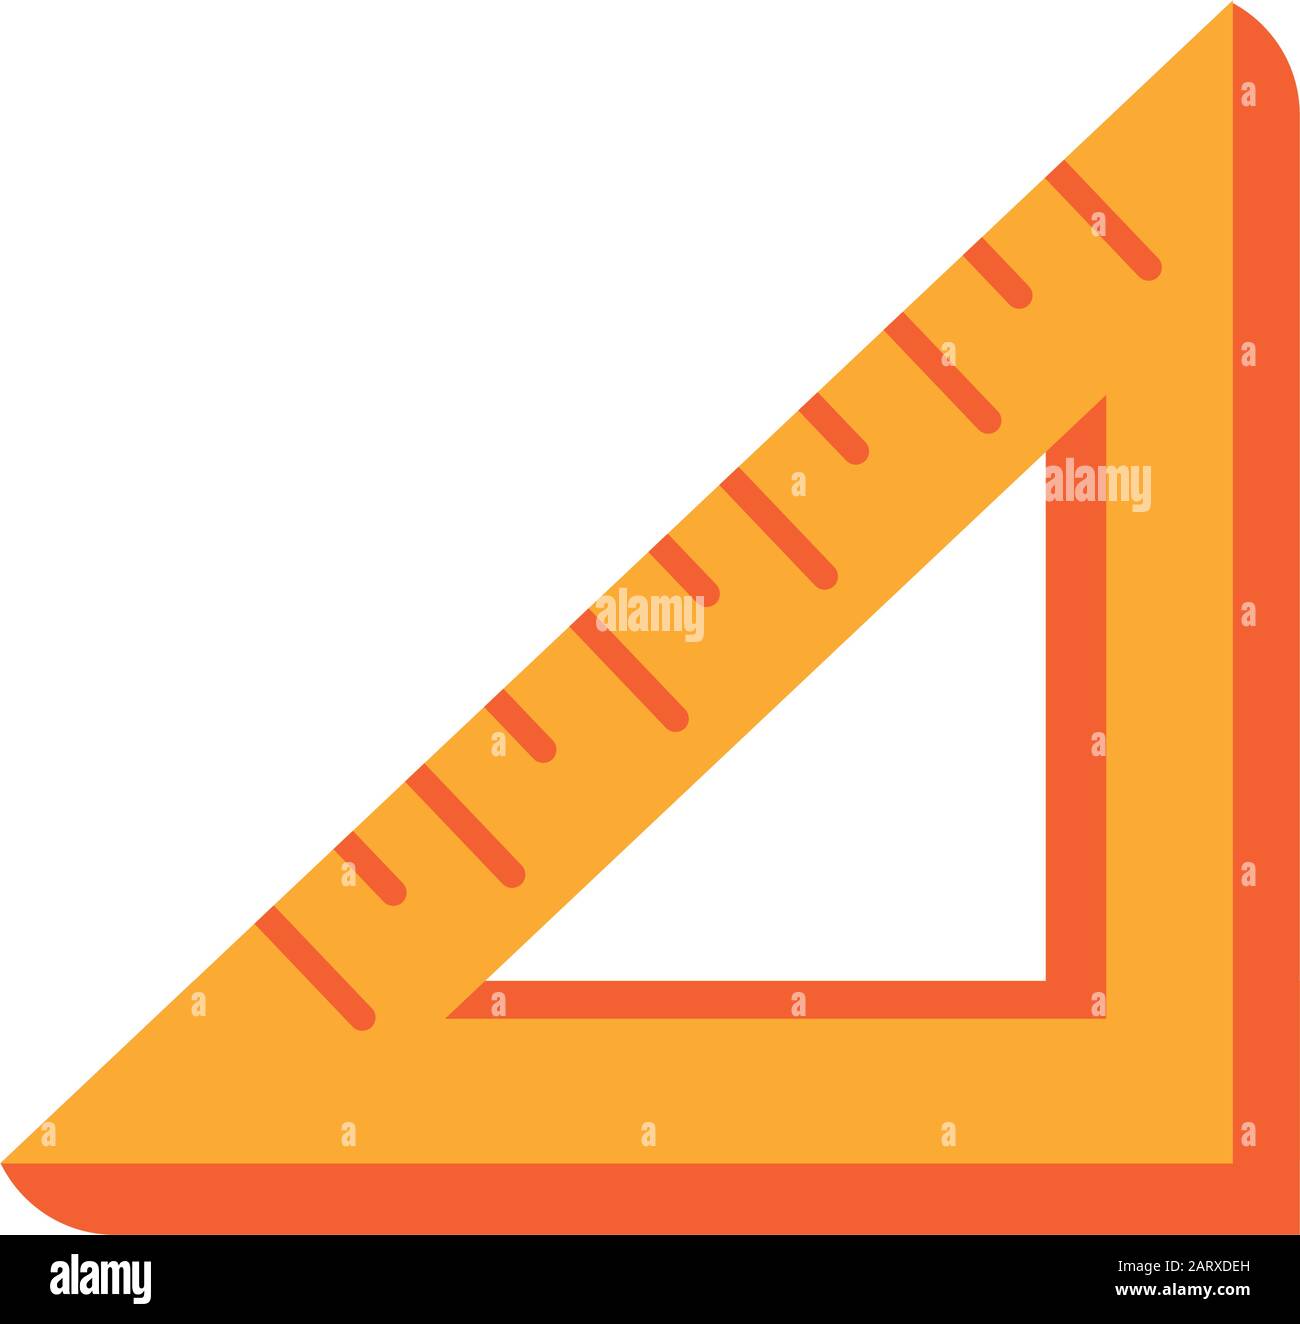 Triangle ruler and straightedge Royalty Free Vector Image